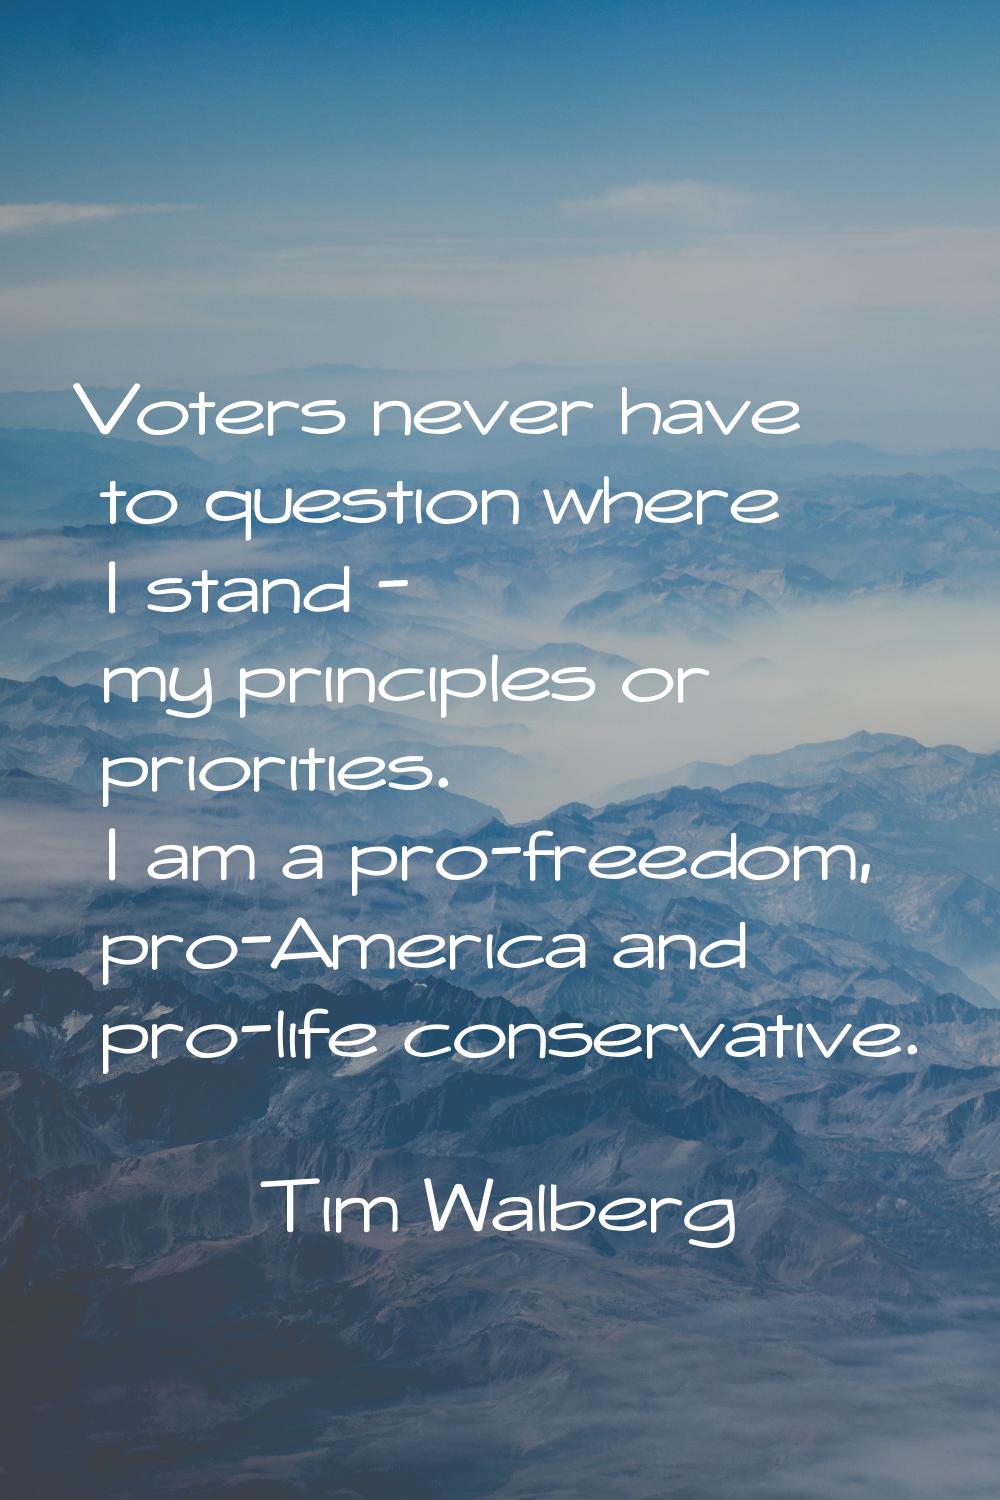 Voters never have to question where I stand - my principles or priorities. I am a pro-freedom, pro-